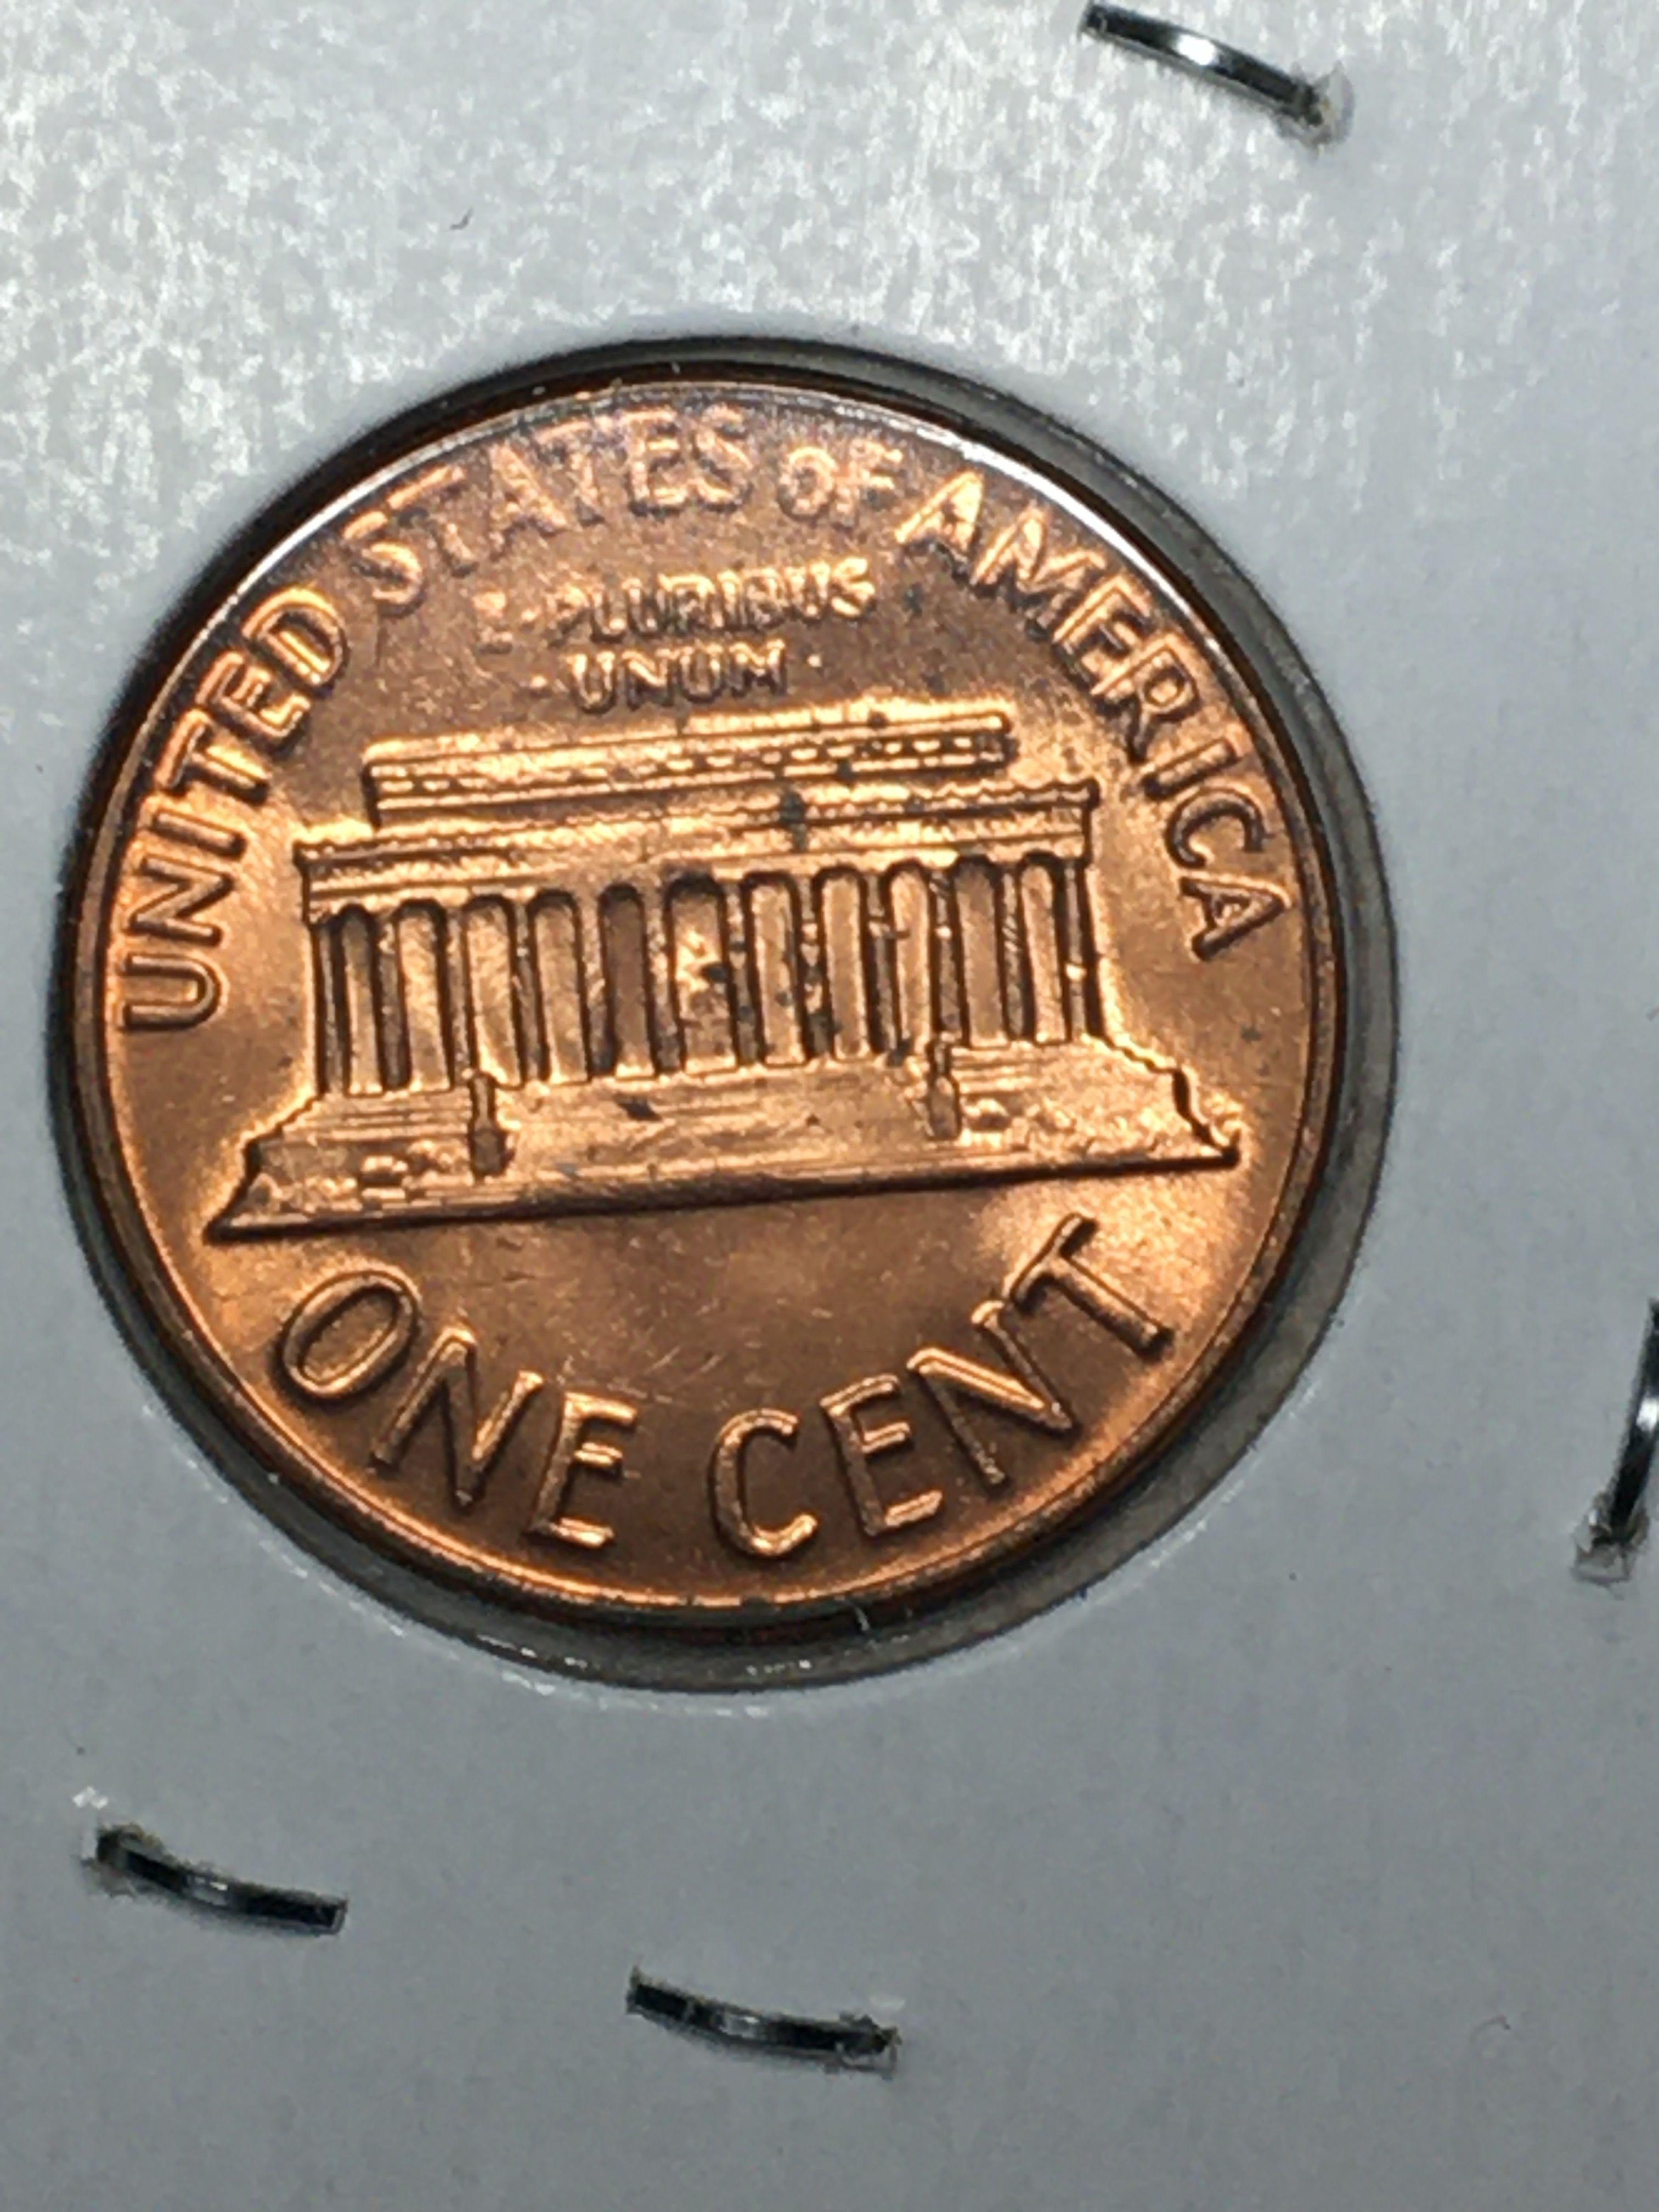 1971 D Lincoln Memorial Cent